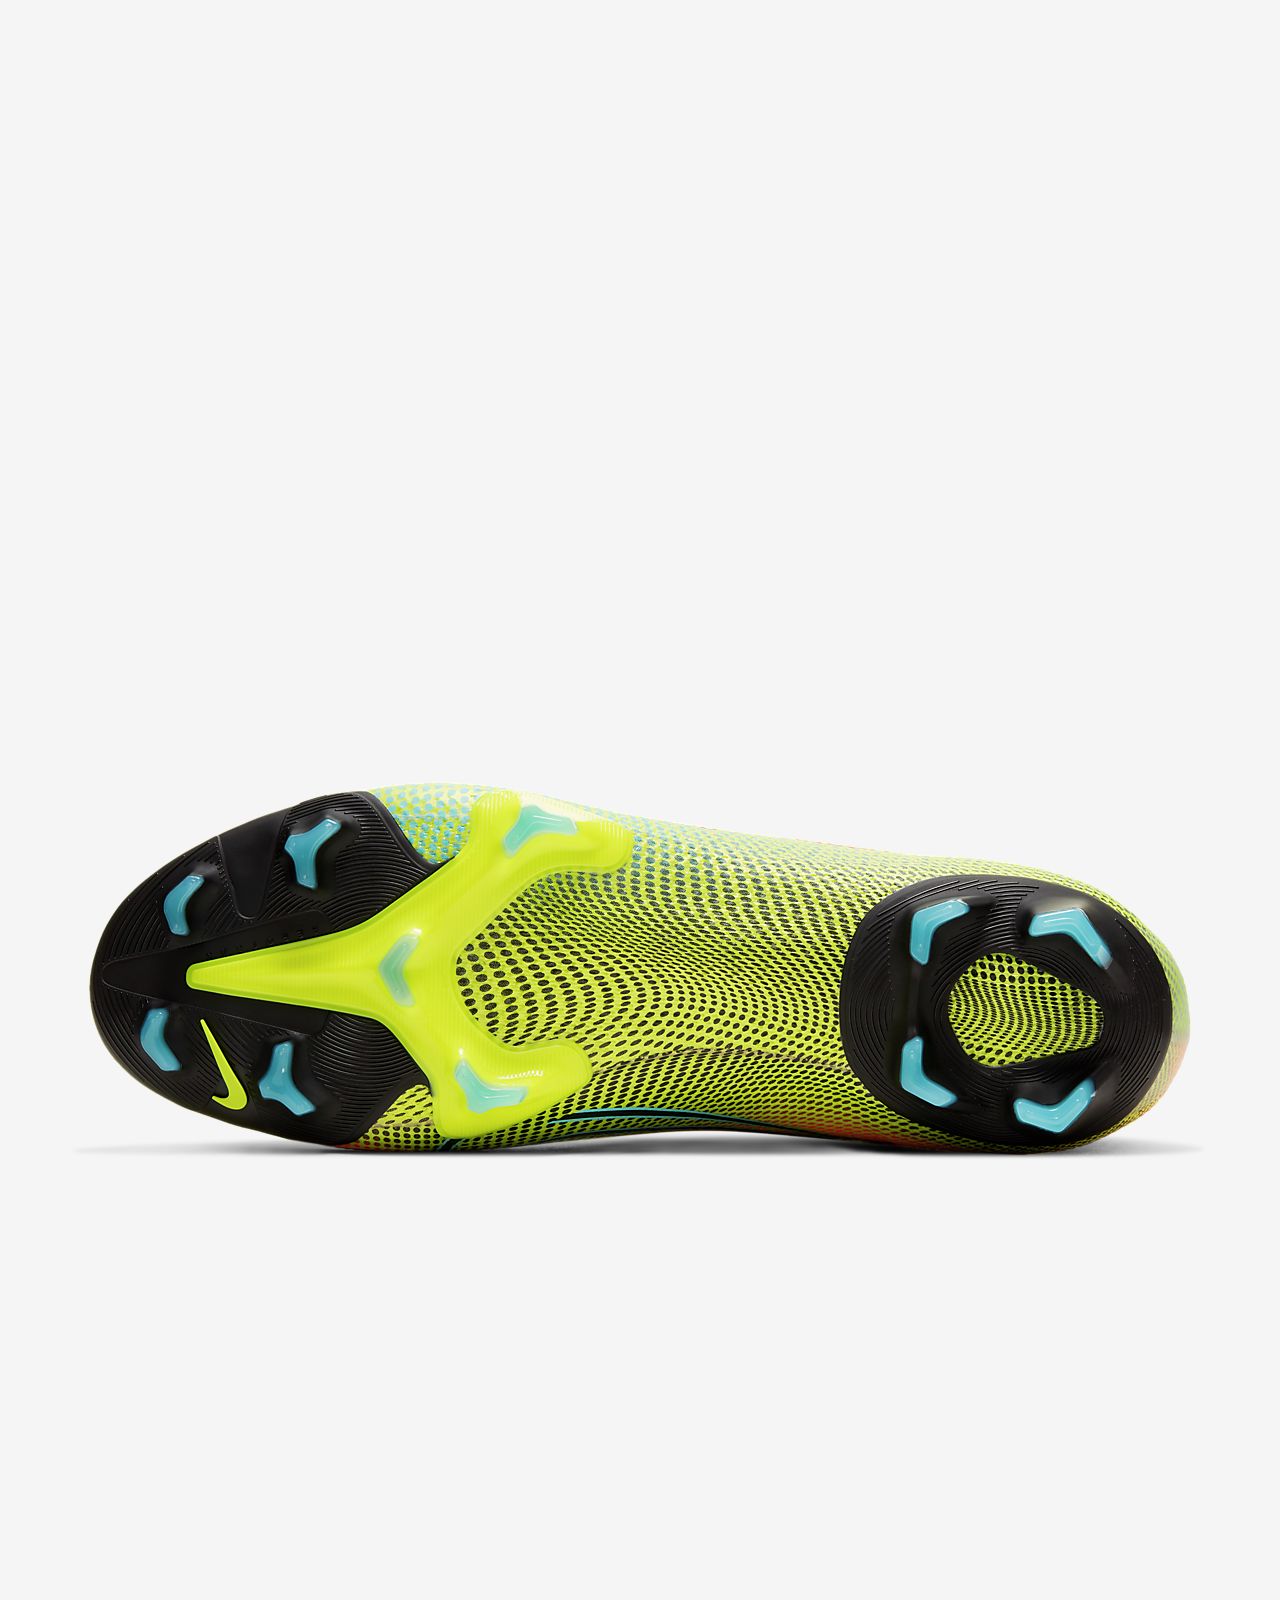 Nike Mercurial Superfly 7 Elite SG PRO FOOTBALL BOOTS